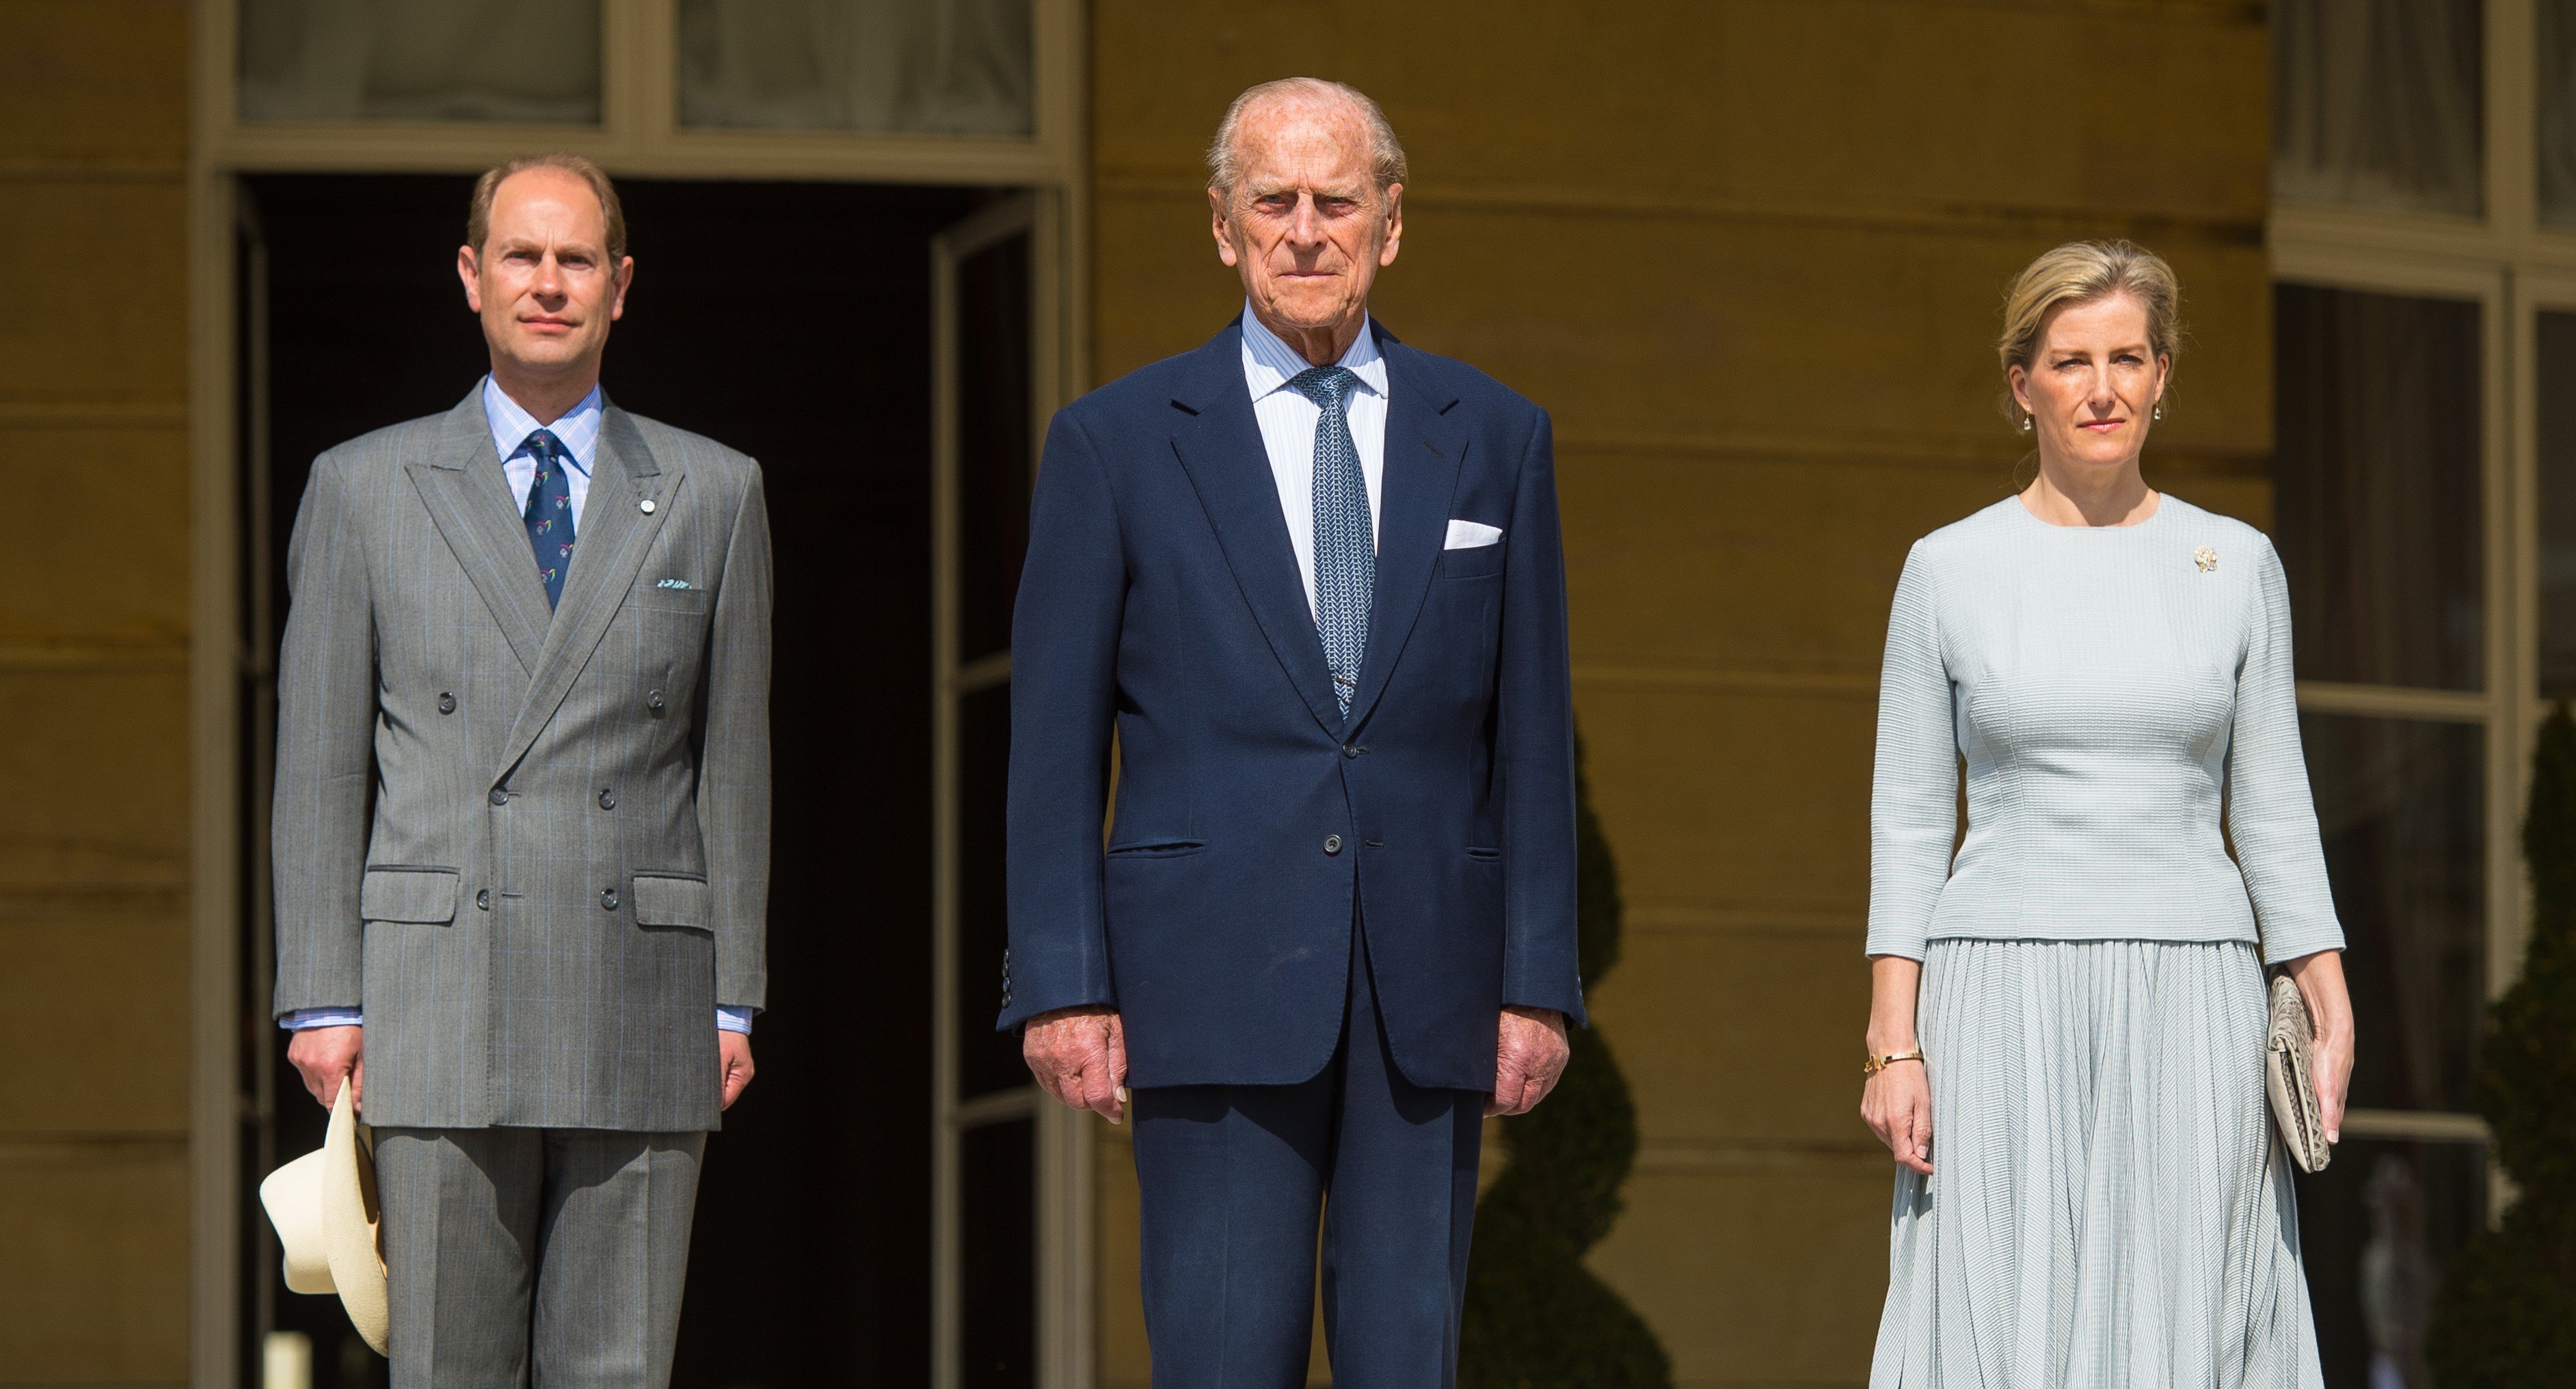 Prince Edward, Prince Philip, and Sophie, Countess of Wessex standing next to one another at the Duke of Edinburgh Award's 60th Anniversary Garden Party